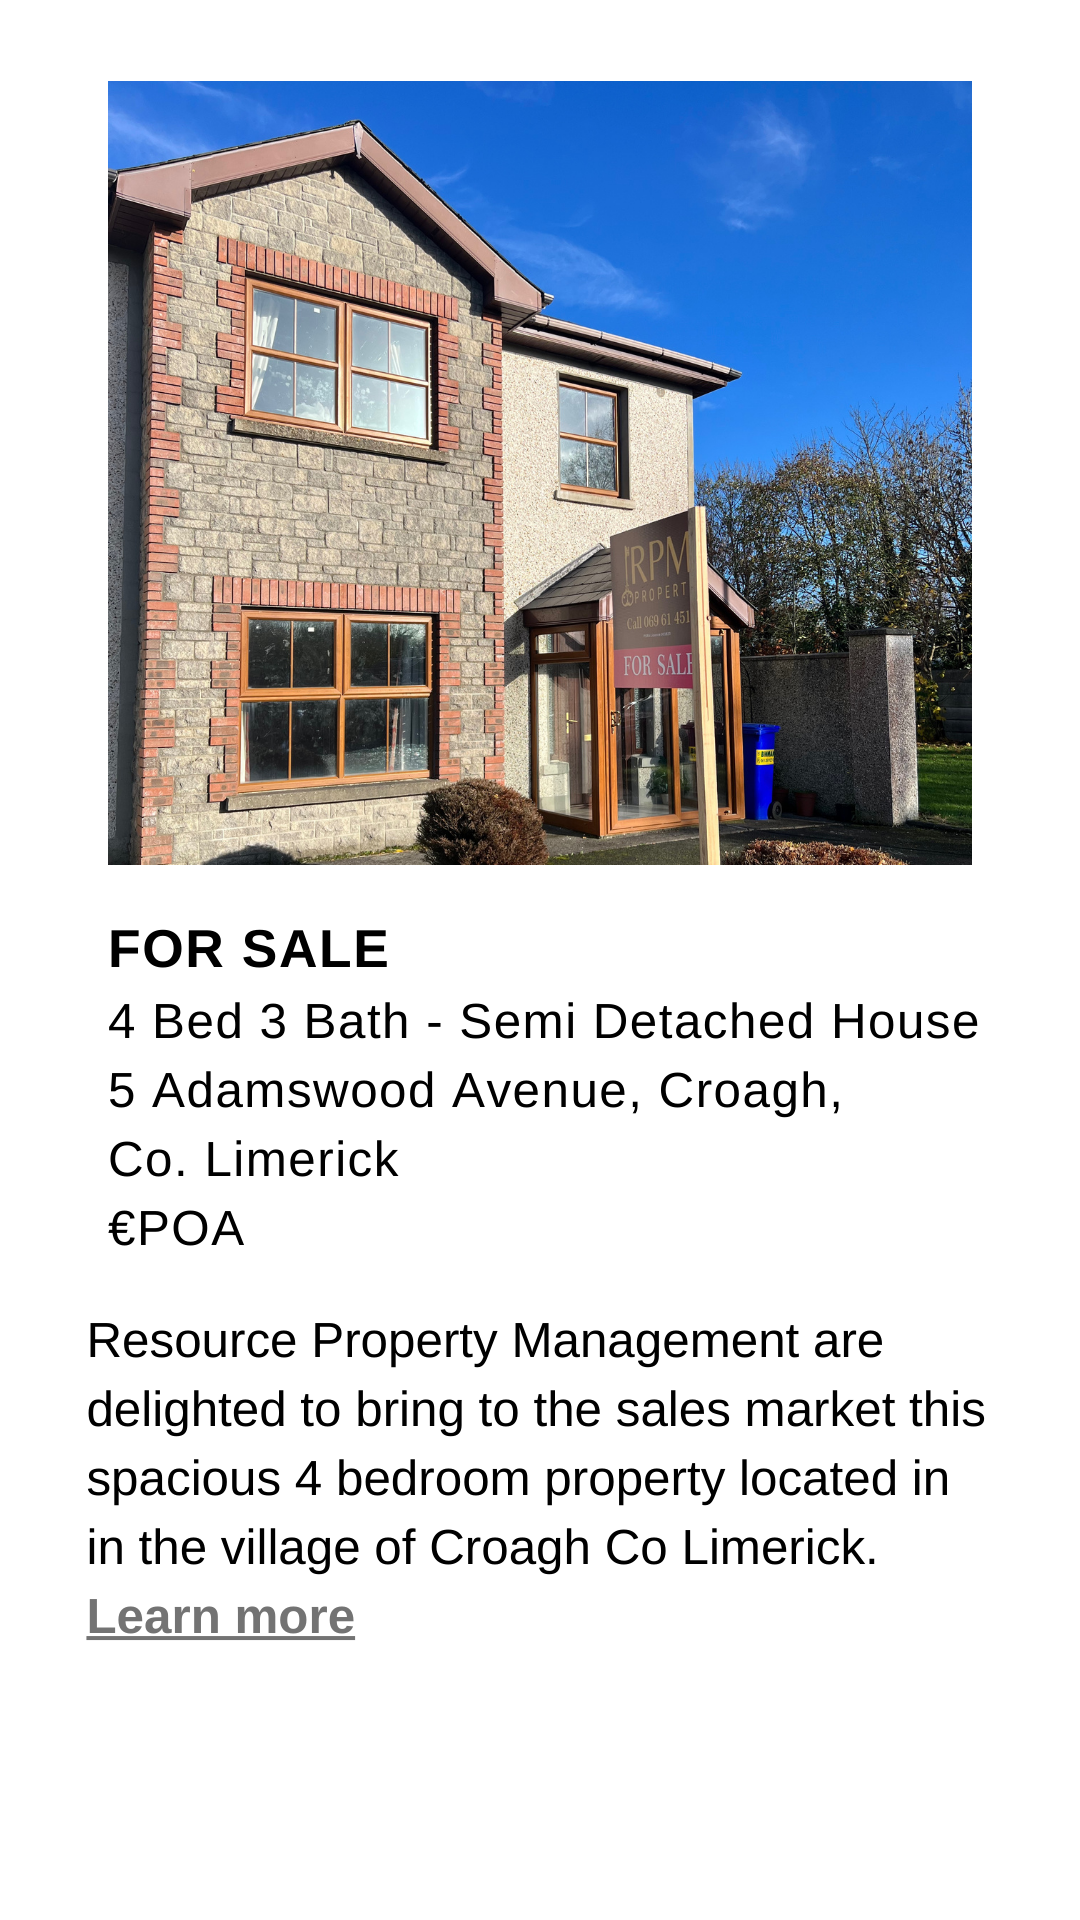 3 Bed, 3 Bath, House to Let, Woodfield Drive, Newcastle West, Co Limerick, RPM Property